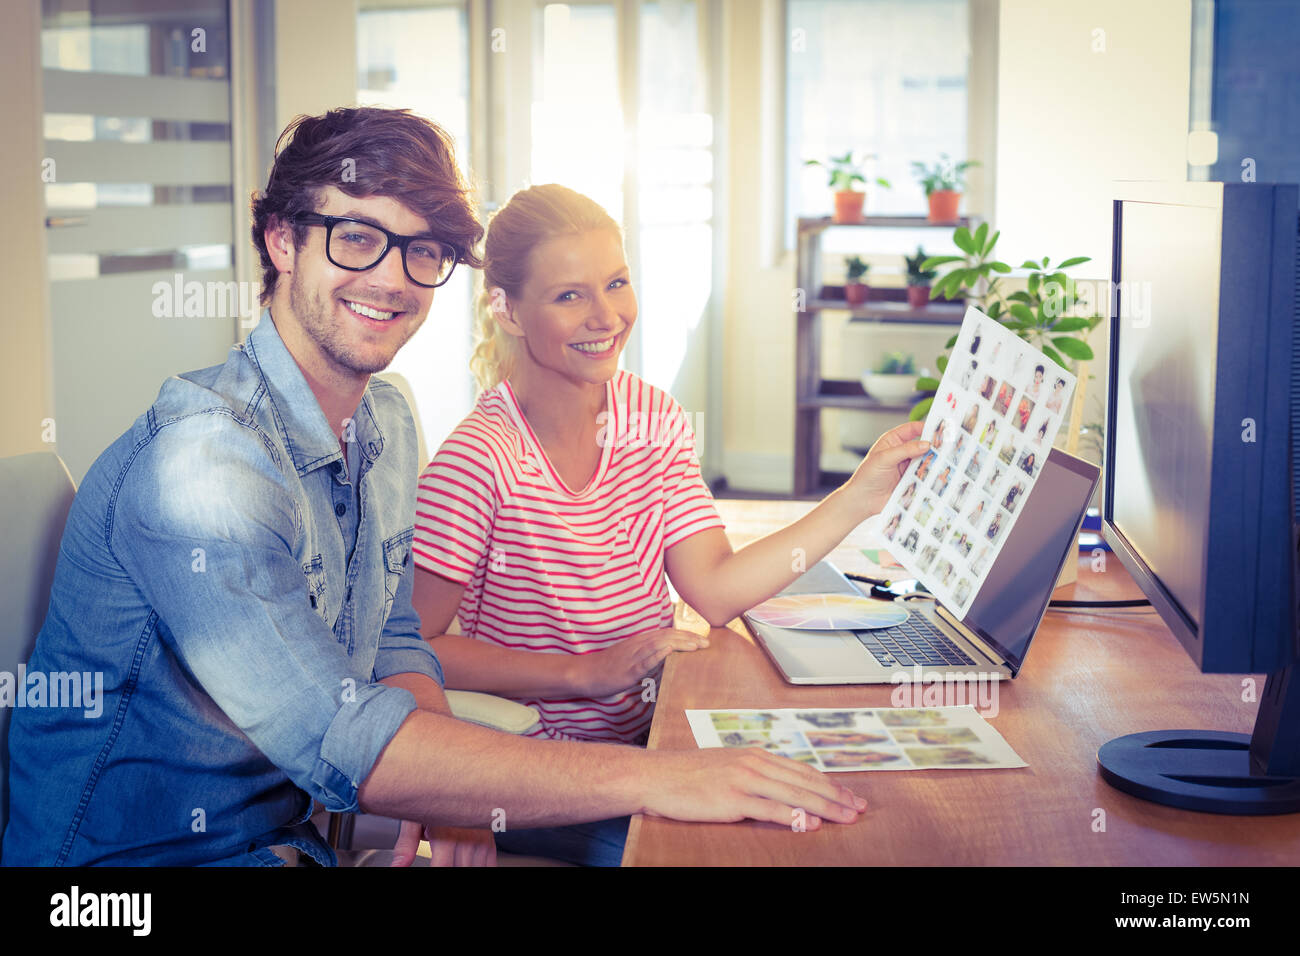 Happy designers working together Stock Photo